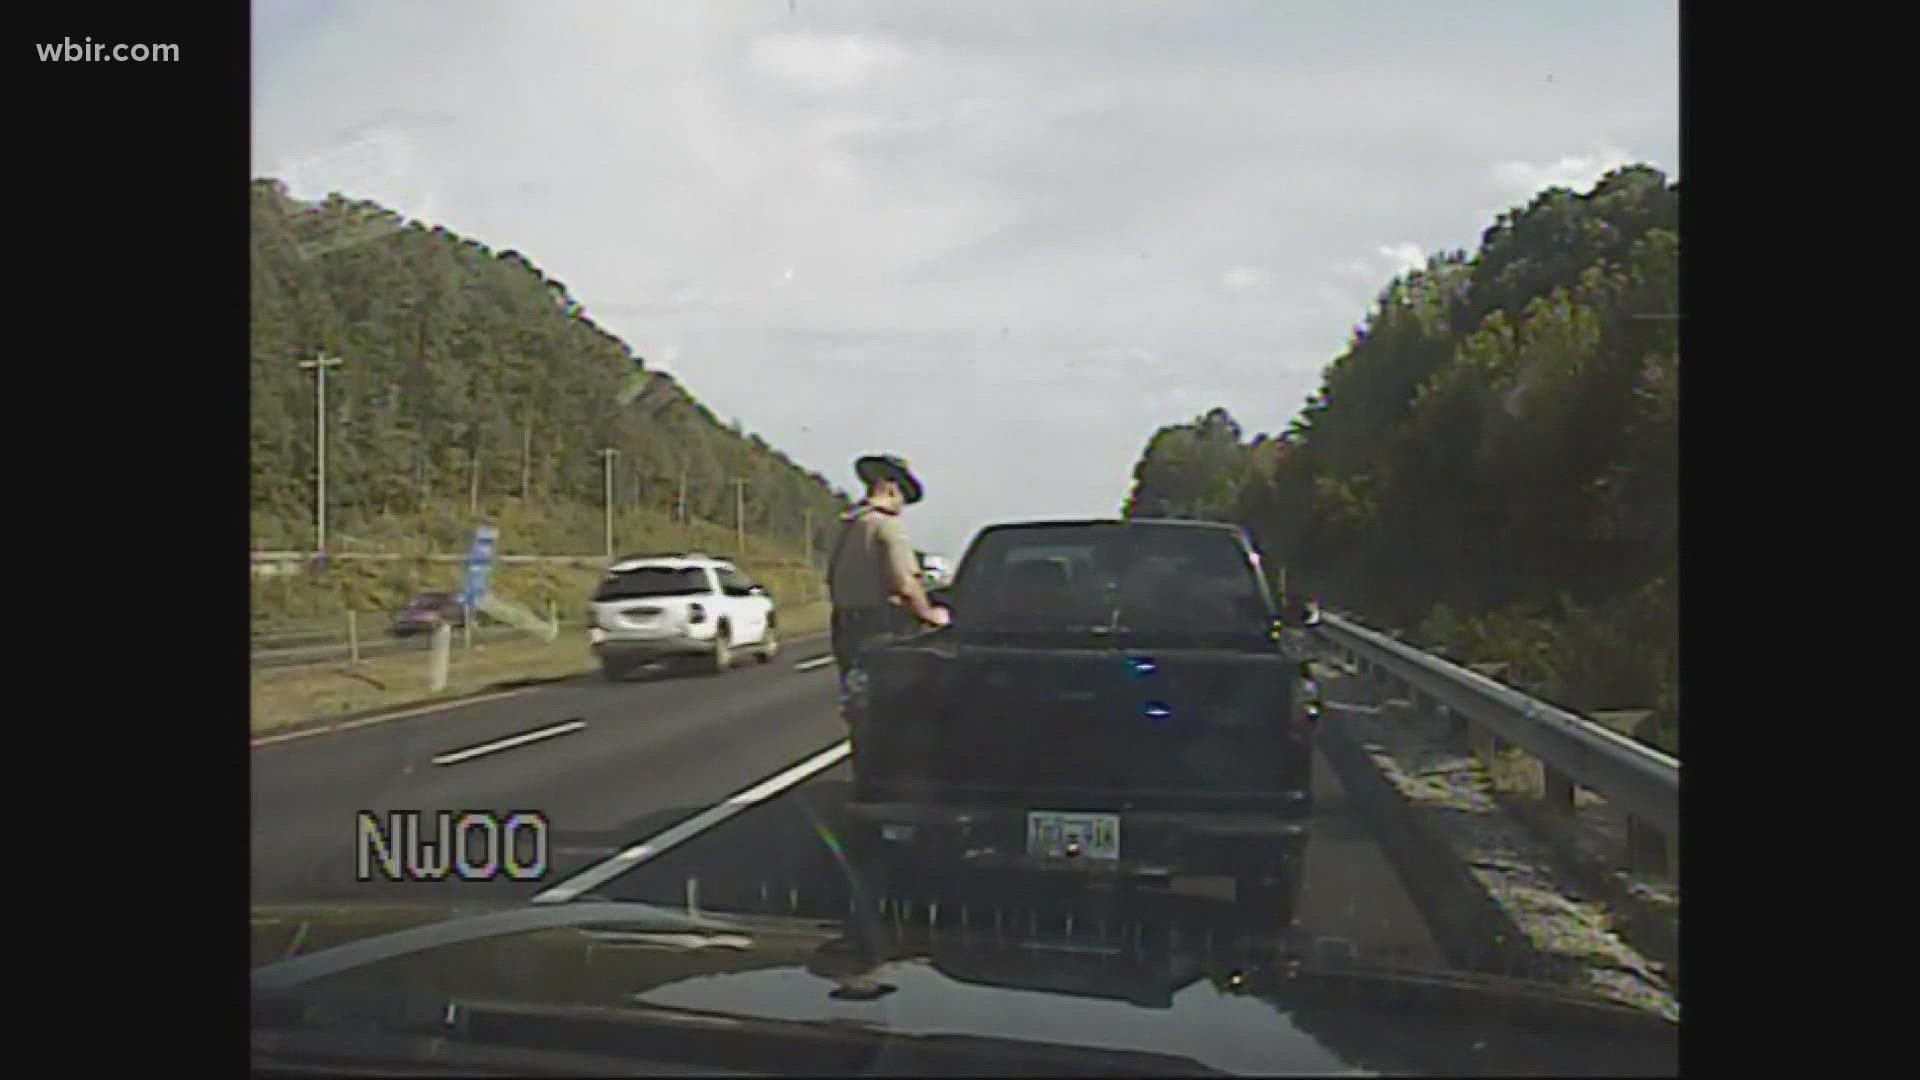 The Tennessee Peace Officer Standards and Training Commission (POST) gave former Trooper Isaiah Lloyd a two year suspension, but backdated it.